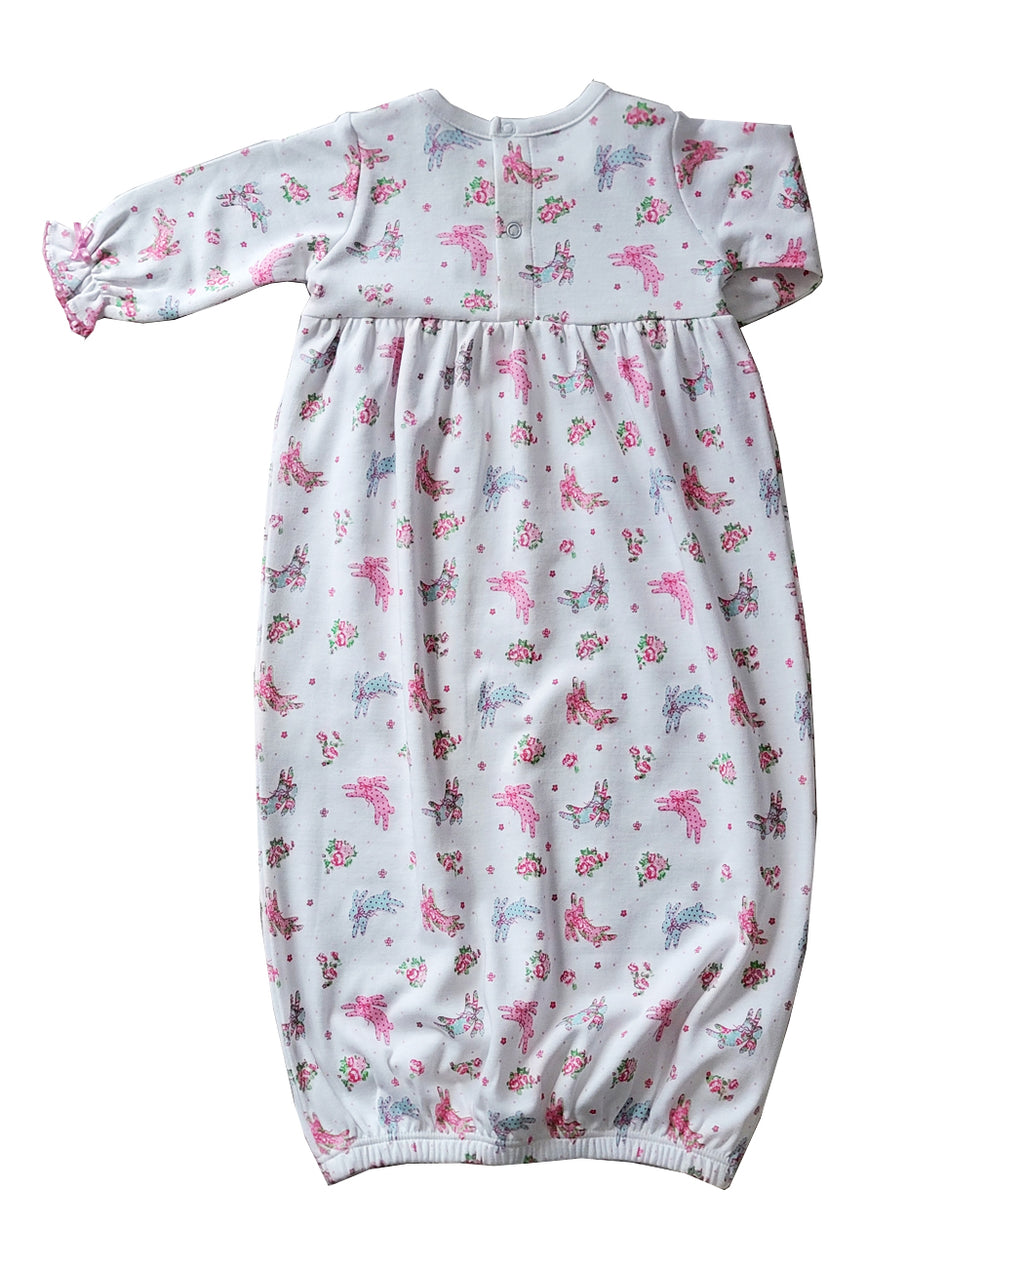 Baby Girl's "Happy Easter" Bunny Print Daygown - Little Threads Inc. Children's Clothing